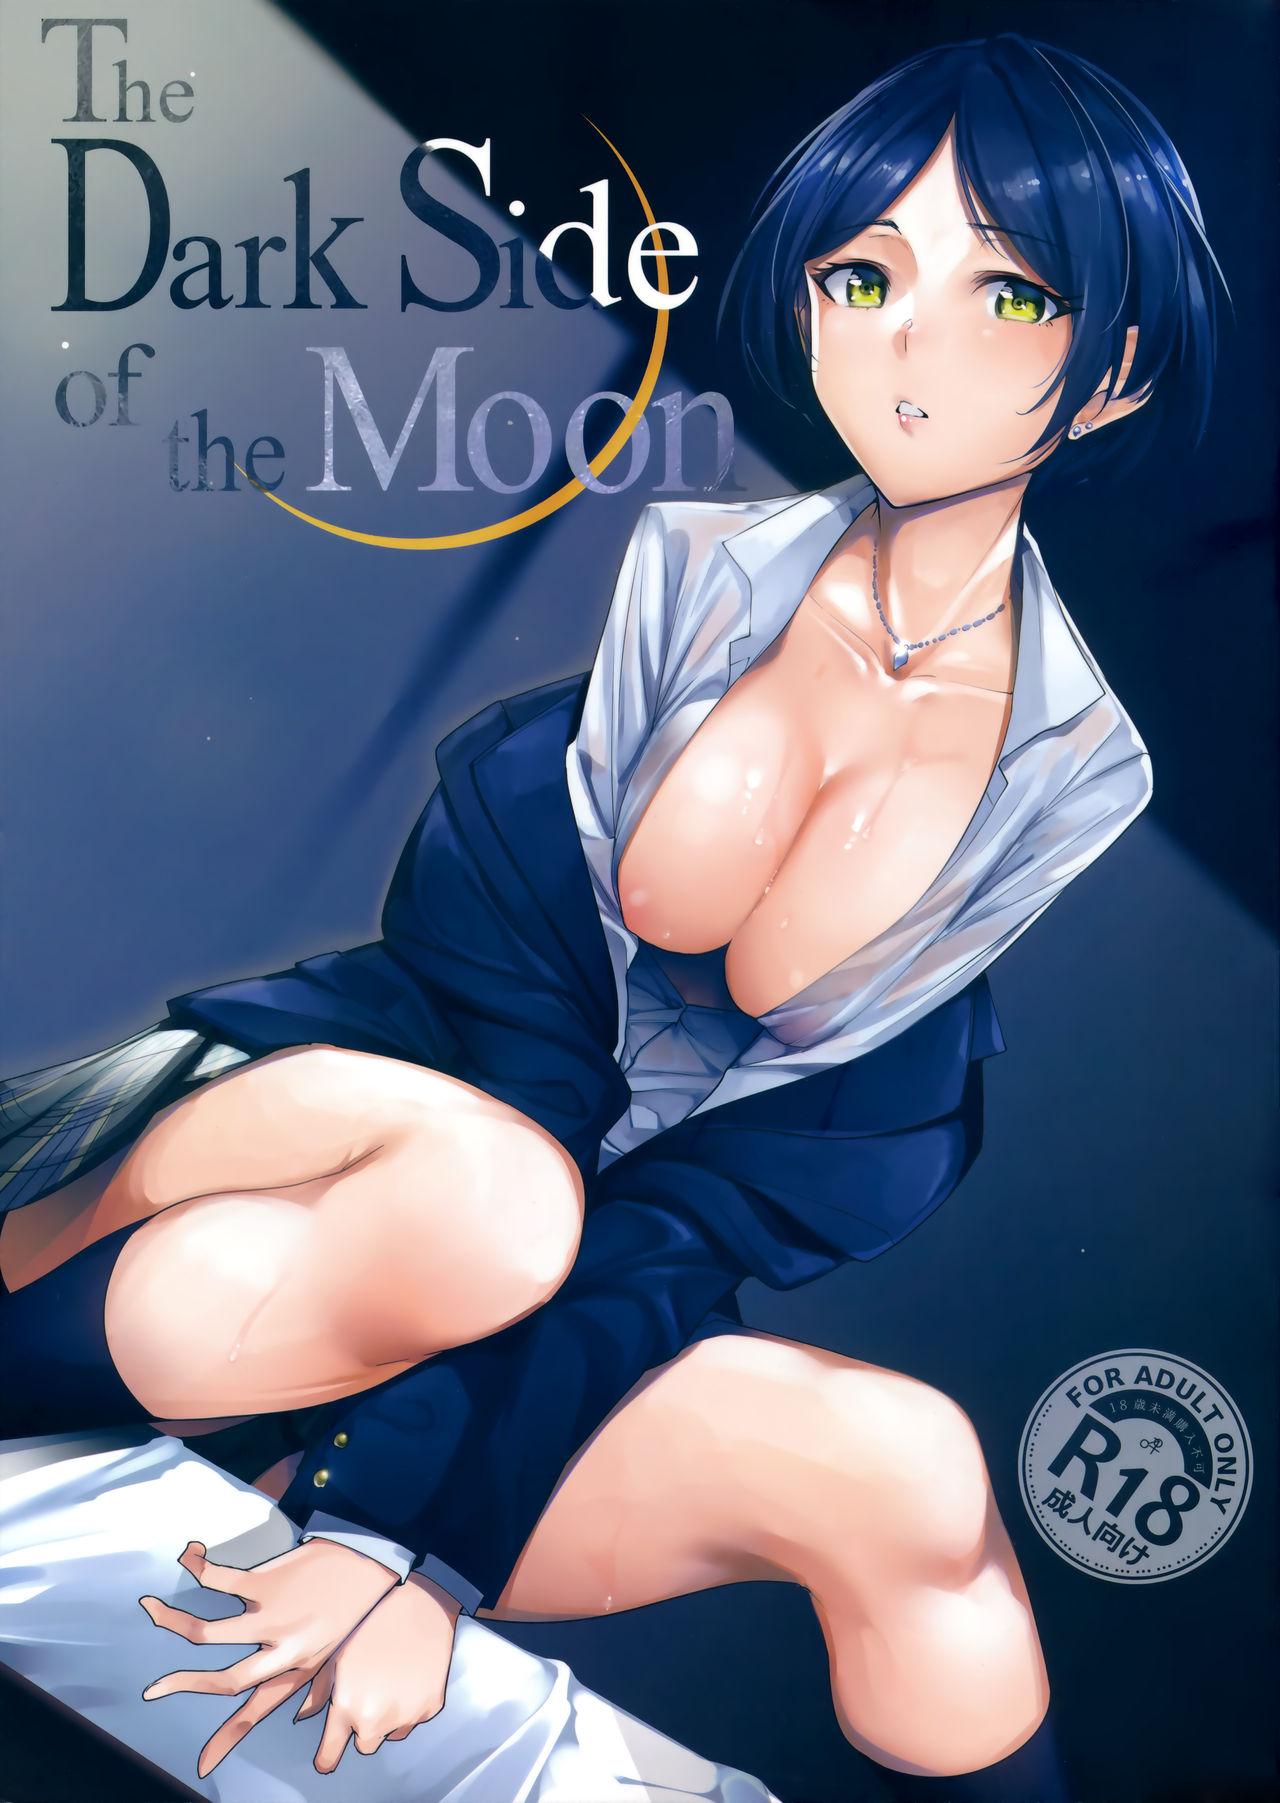 Sologirl The Dark Side of the Moon - The idolmaster Caiu Na Net - Picture 1